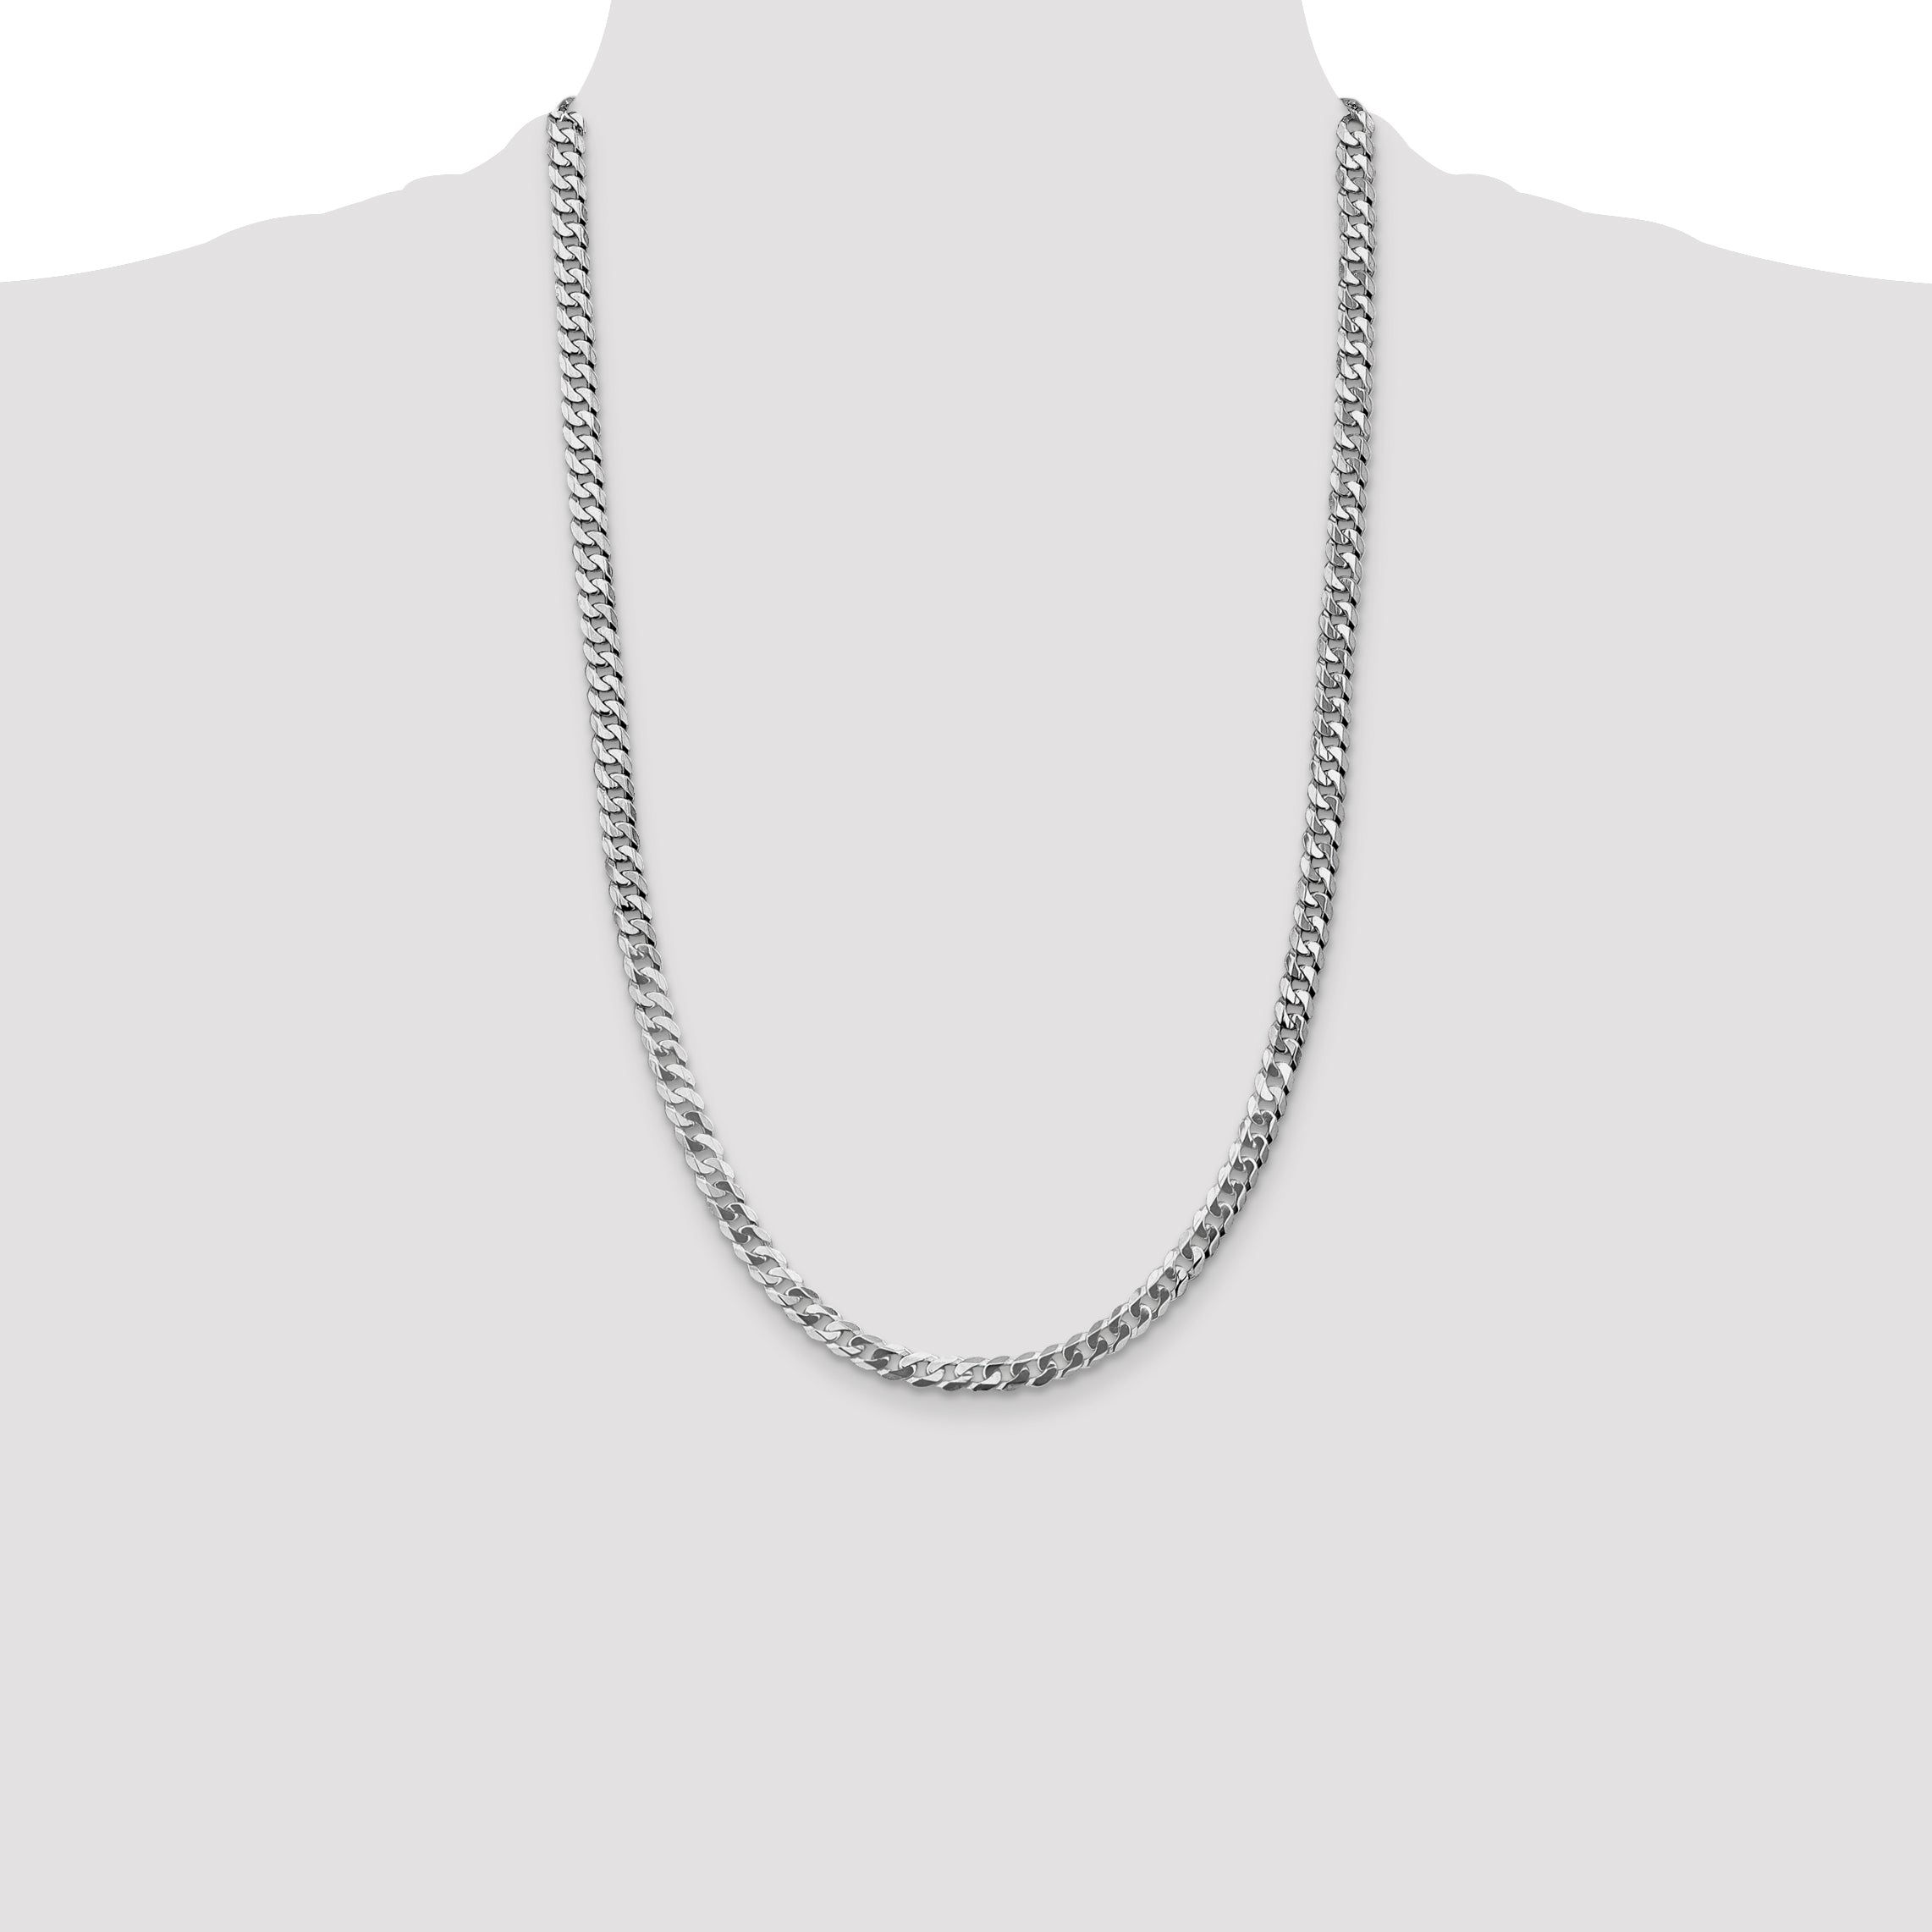 14K White Gold 18 inch 4.75mm Flat Beveled Curb with Lobster Clasp Chain